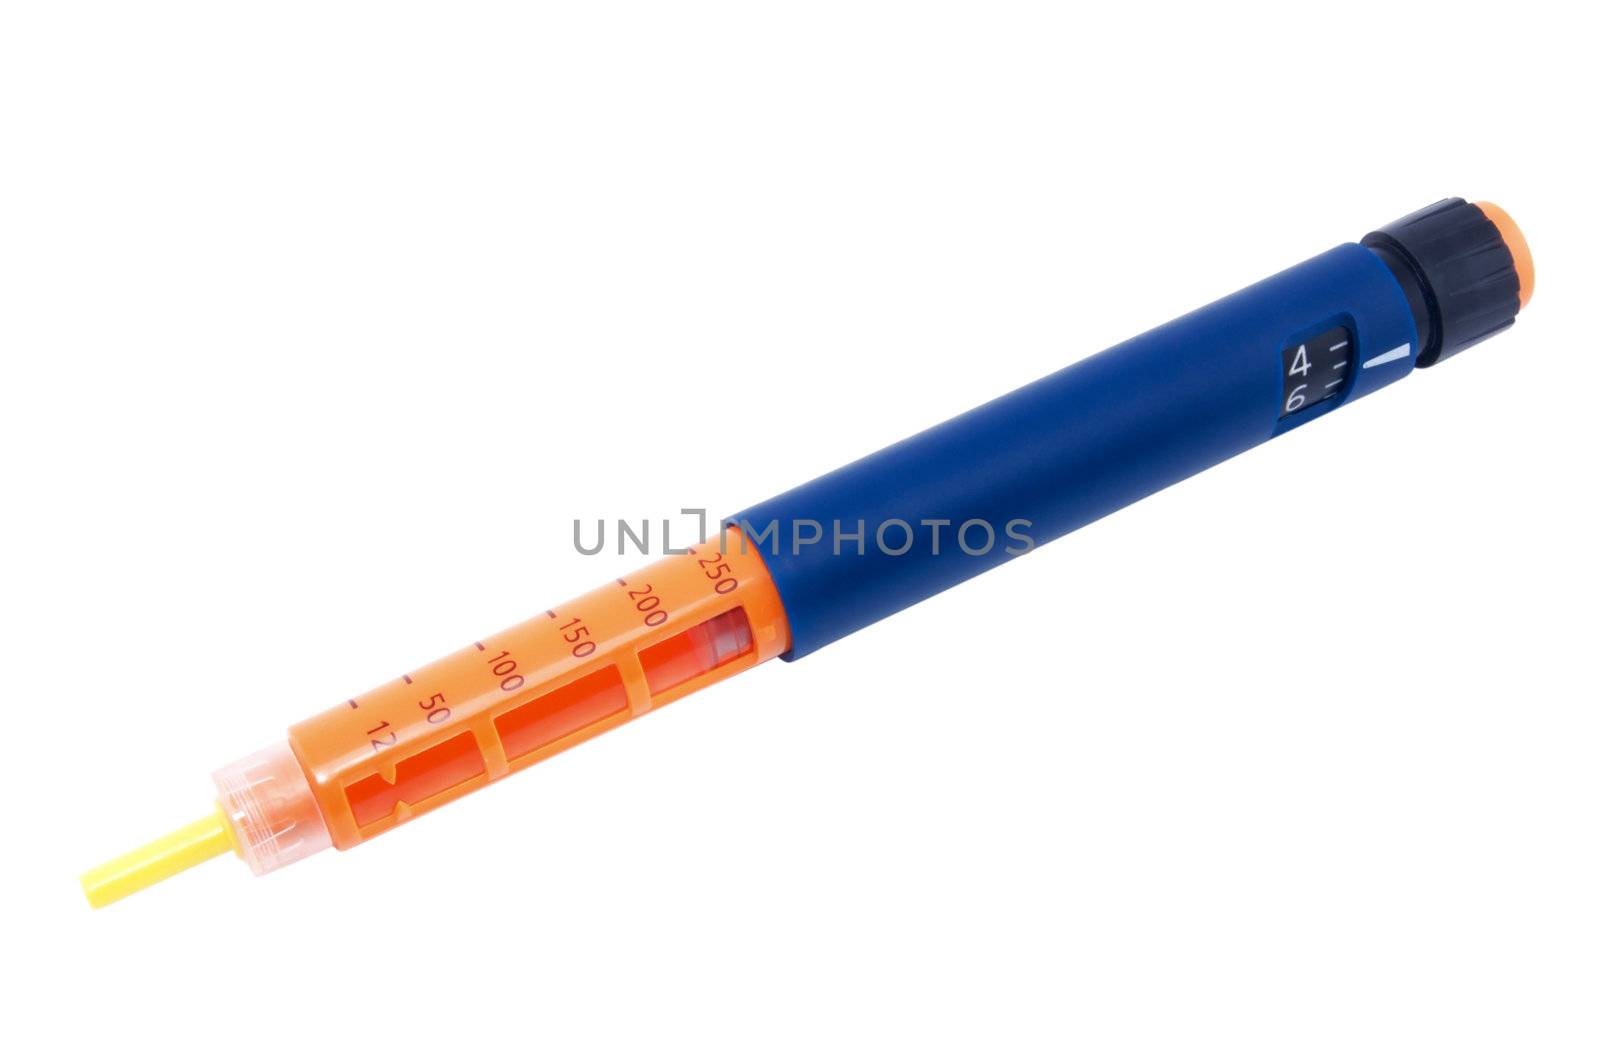 Insulin pen isolated on a white background